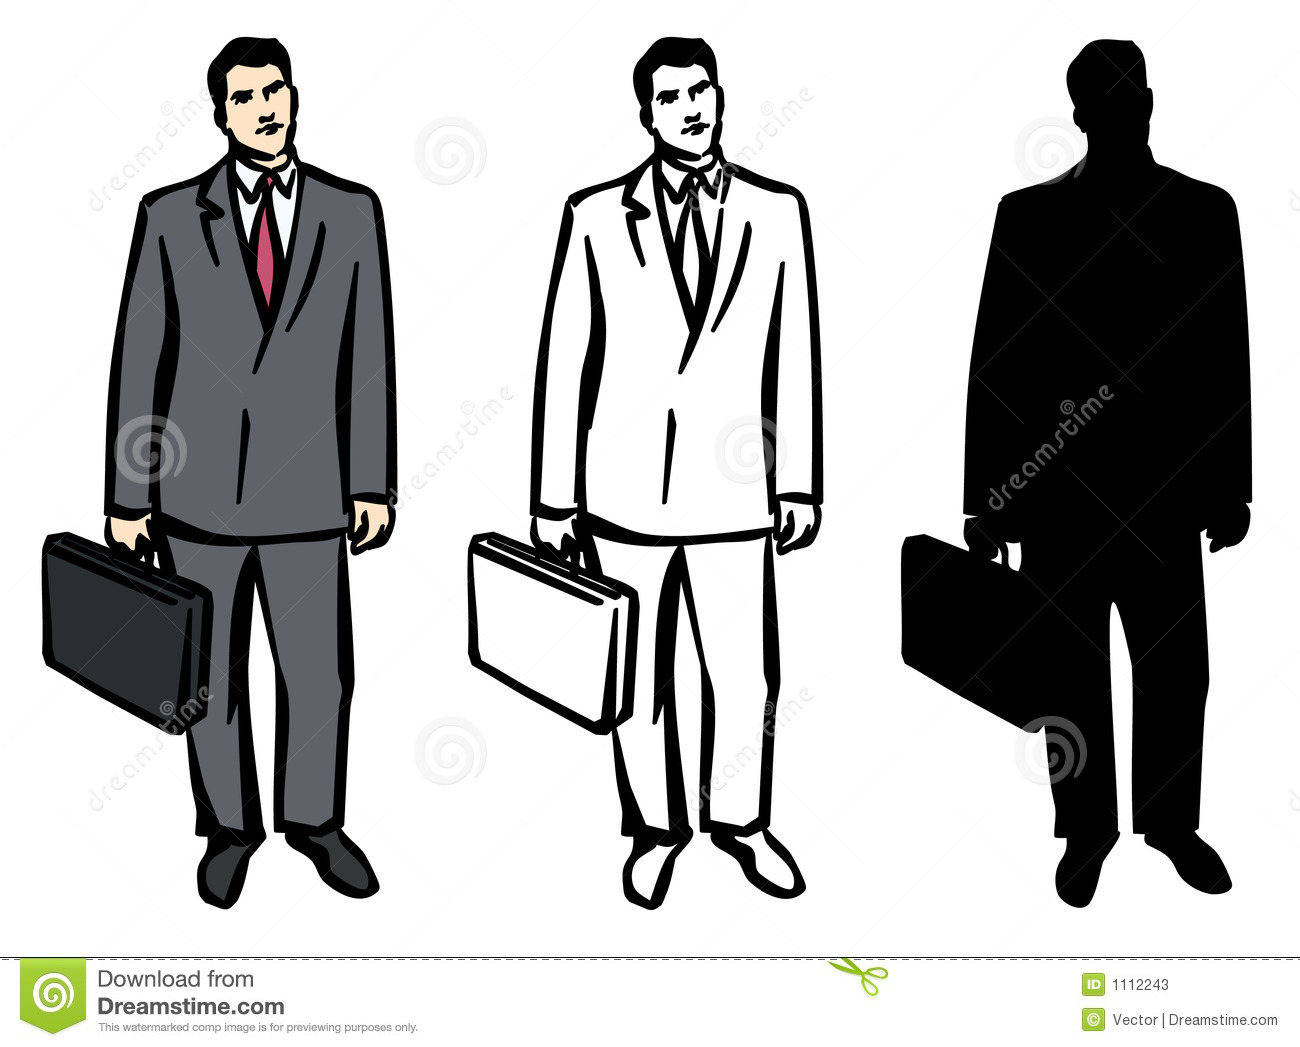 An Illustration Of A Man With Briefcase Black   White Image And